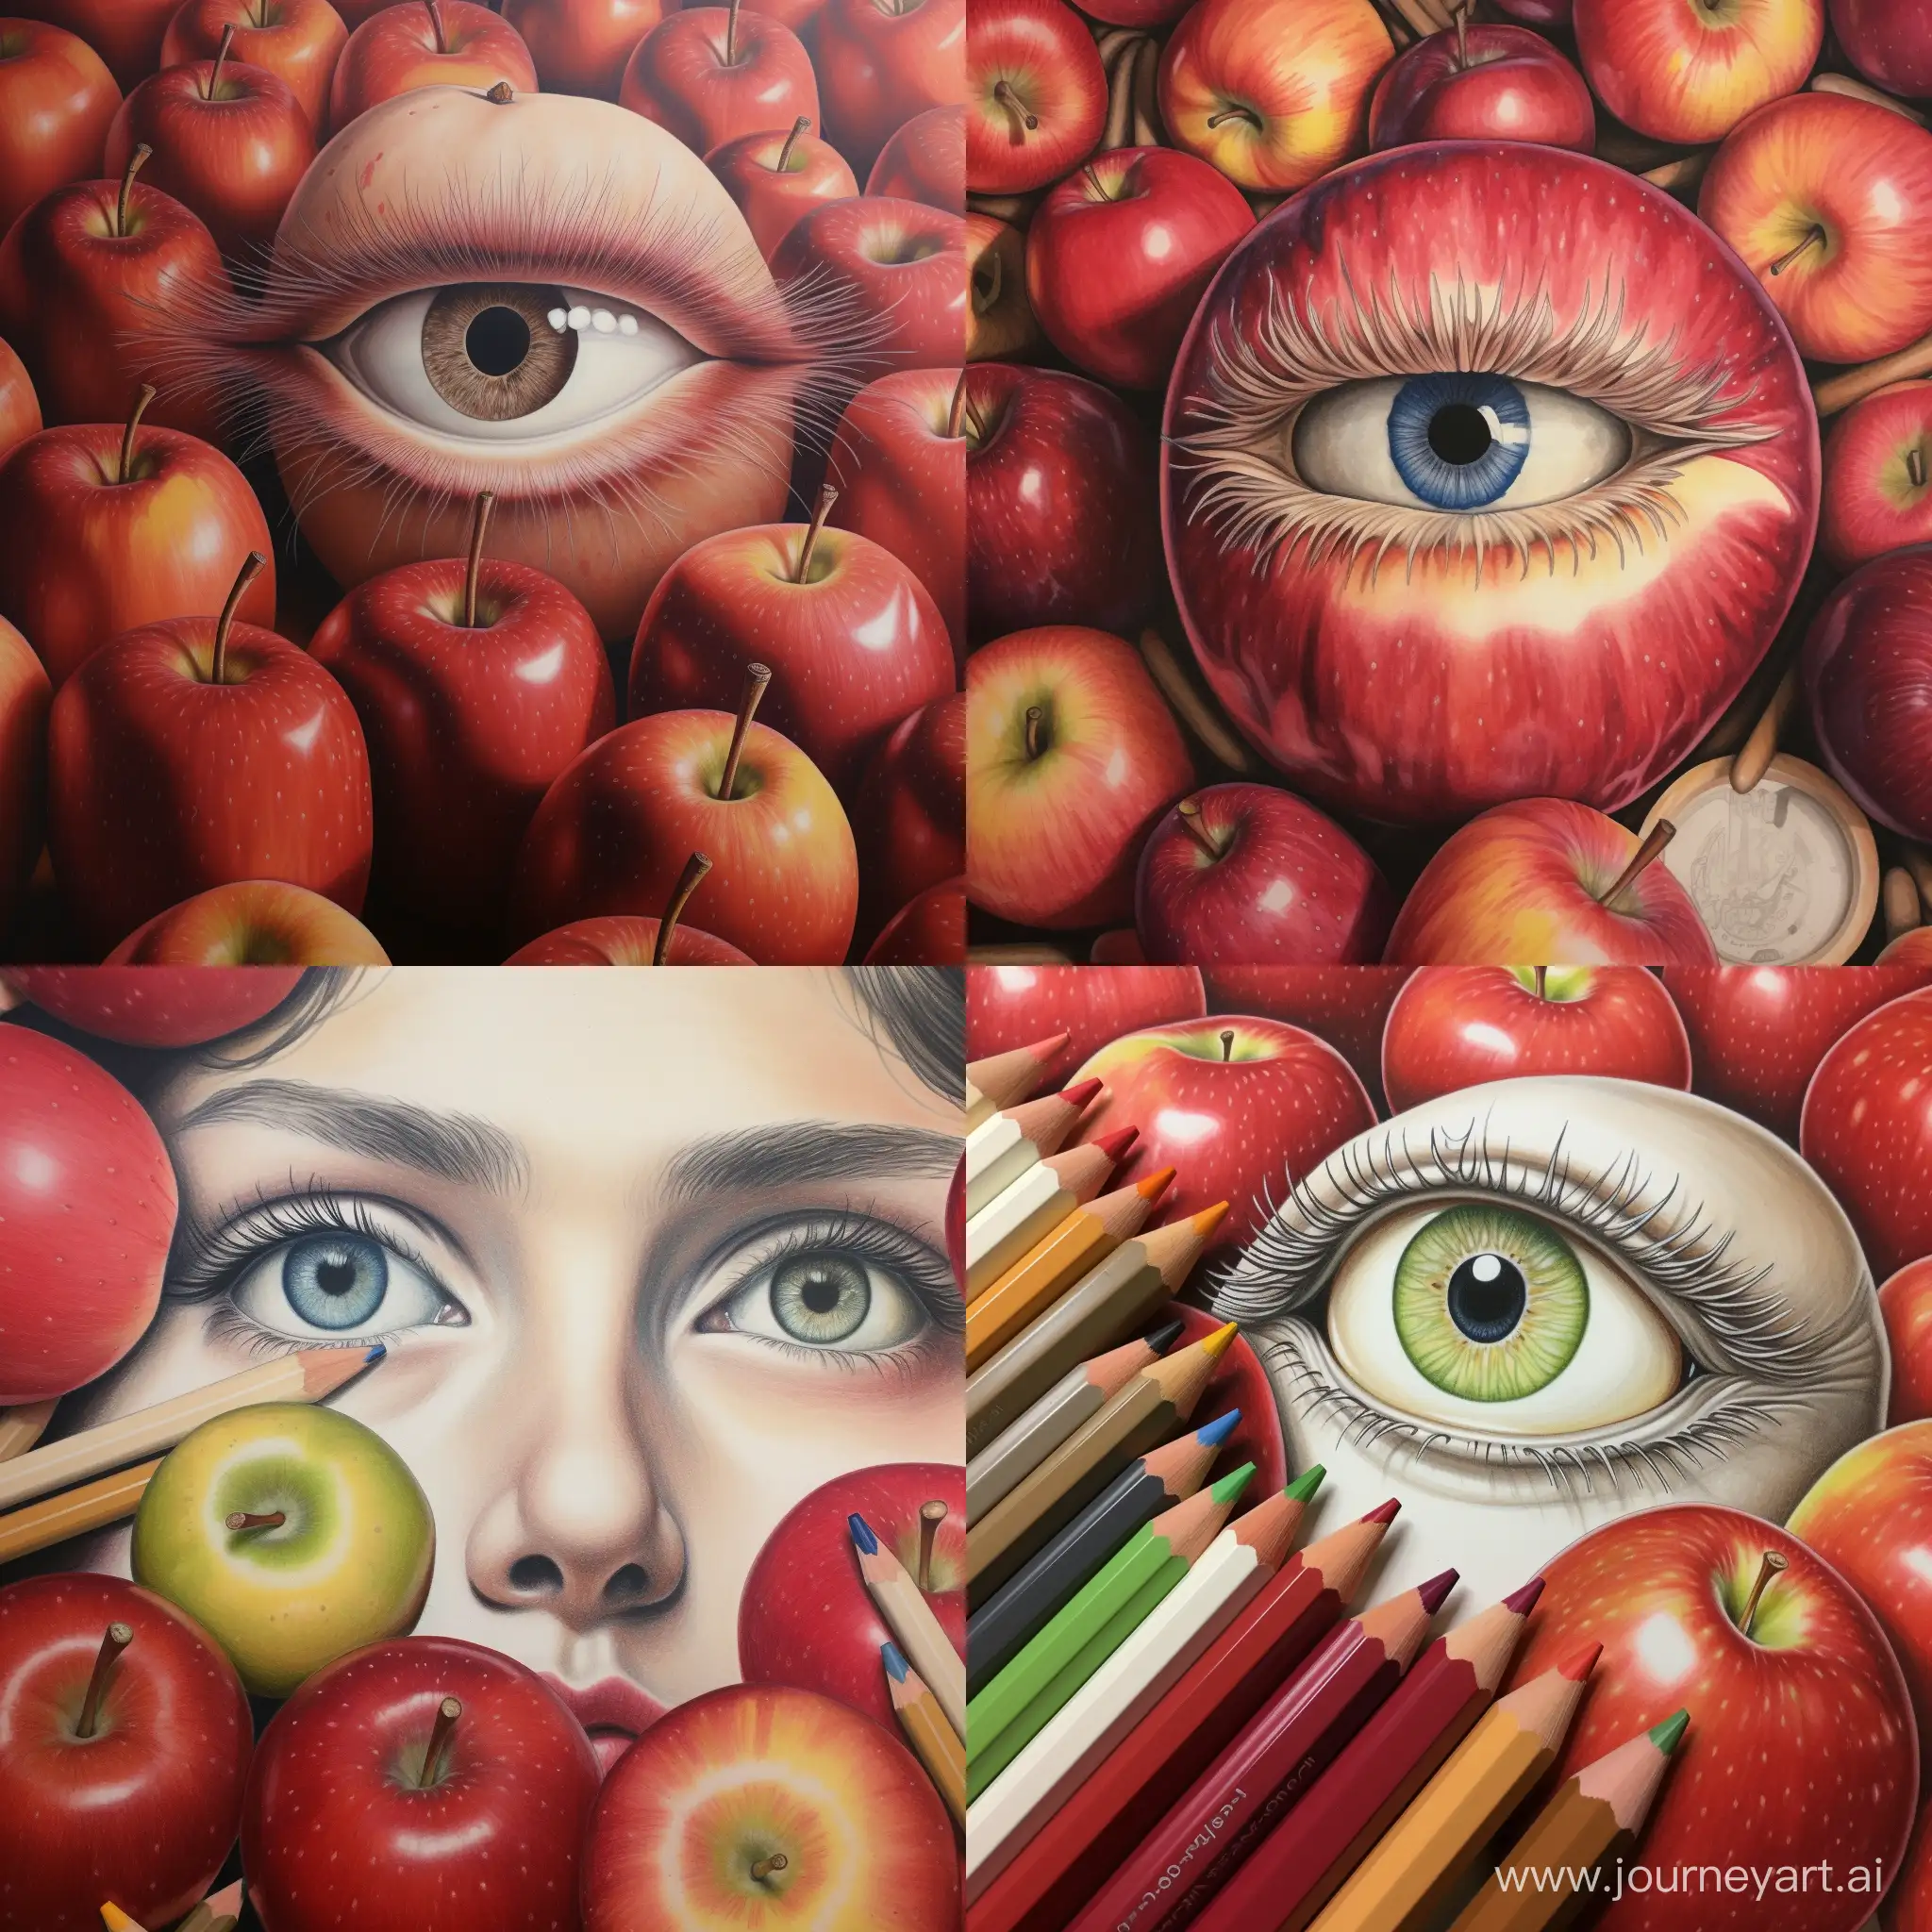 Vibrant-Colored-Pencil-with-Expressive-Eyes-Amidst-Beautiful-Red-Apples